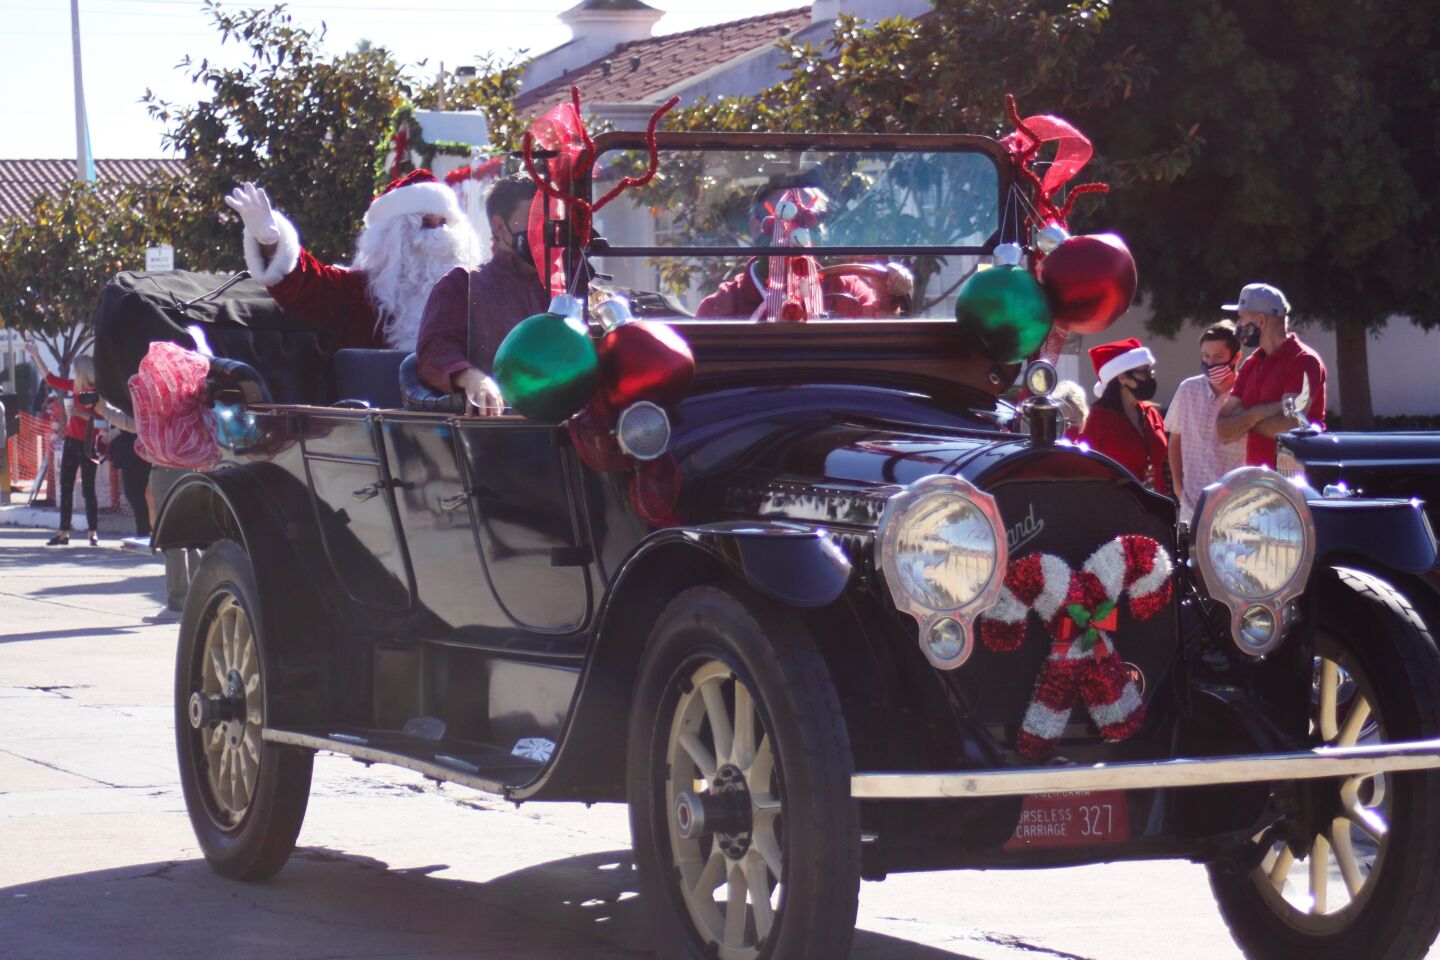 Santa Claus makes his entrance in the Old Black Goose as part of the La Jolla Christmas Parade festivities Dec. 6.